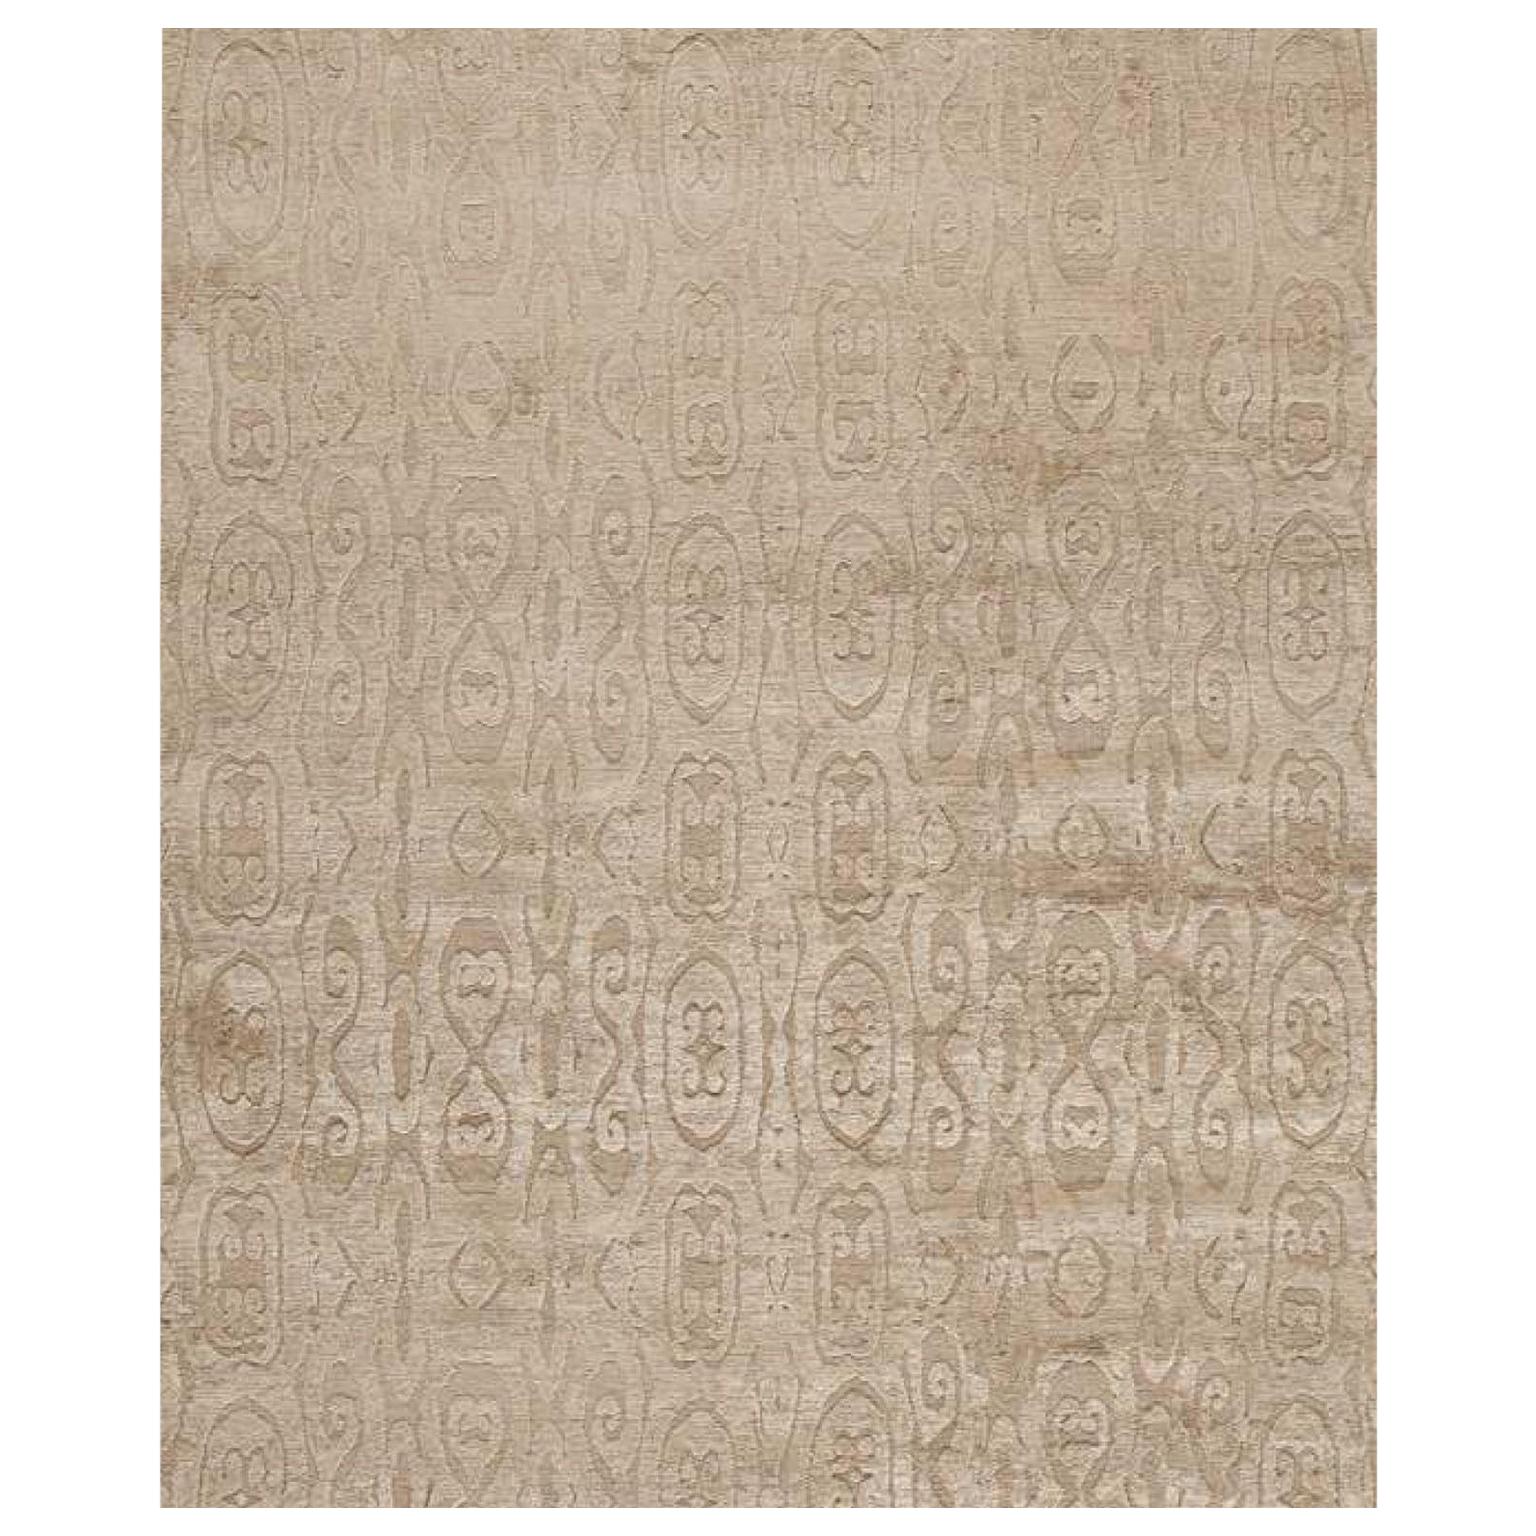 Modern Contemporary Area Rug in Taupe, Handmade of Silk and Wool, "Calista"